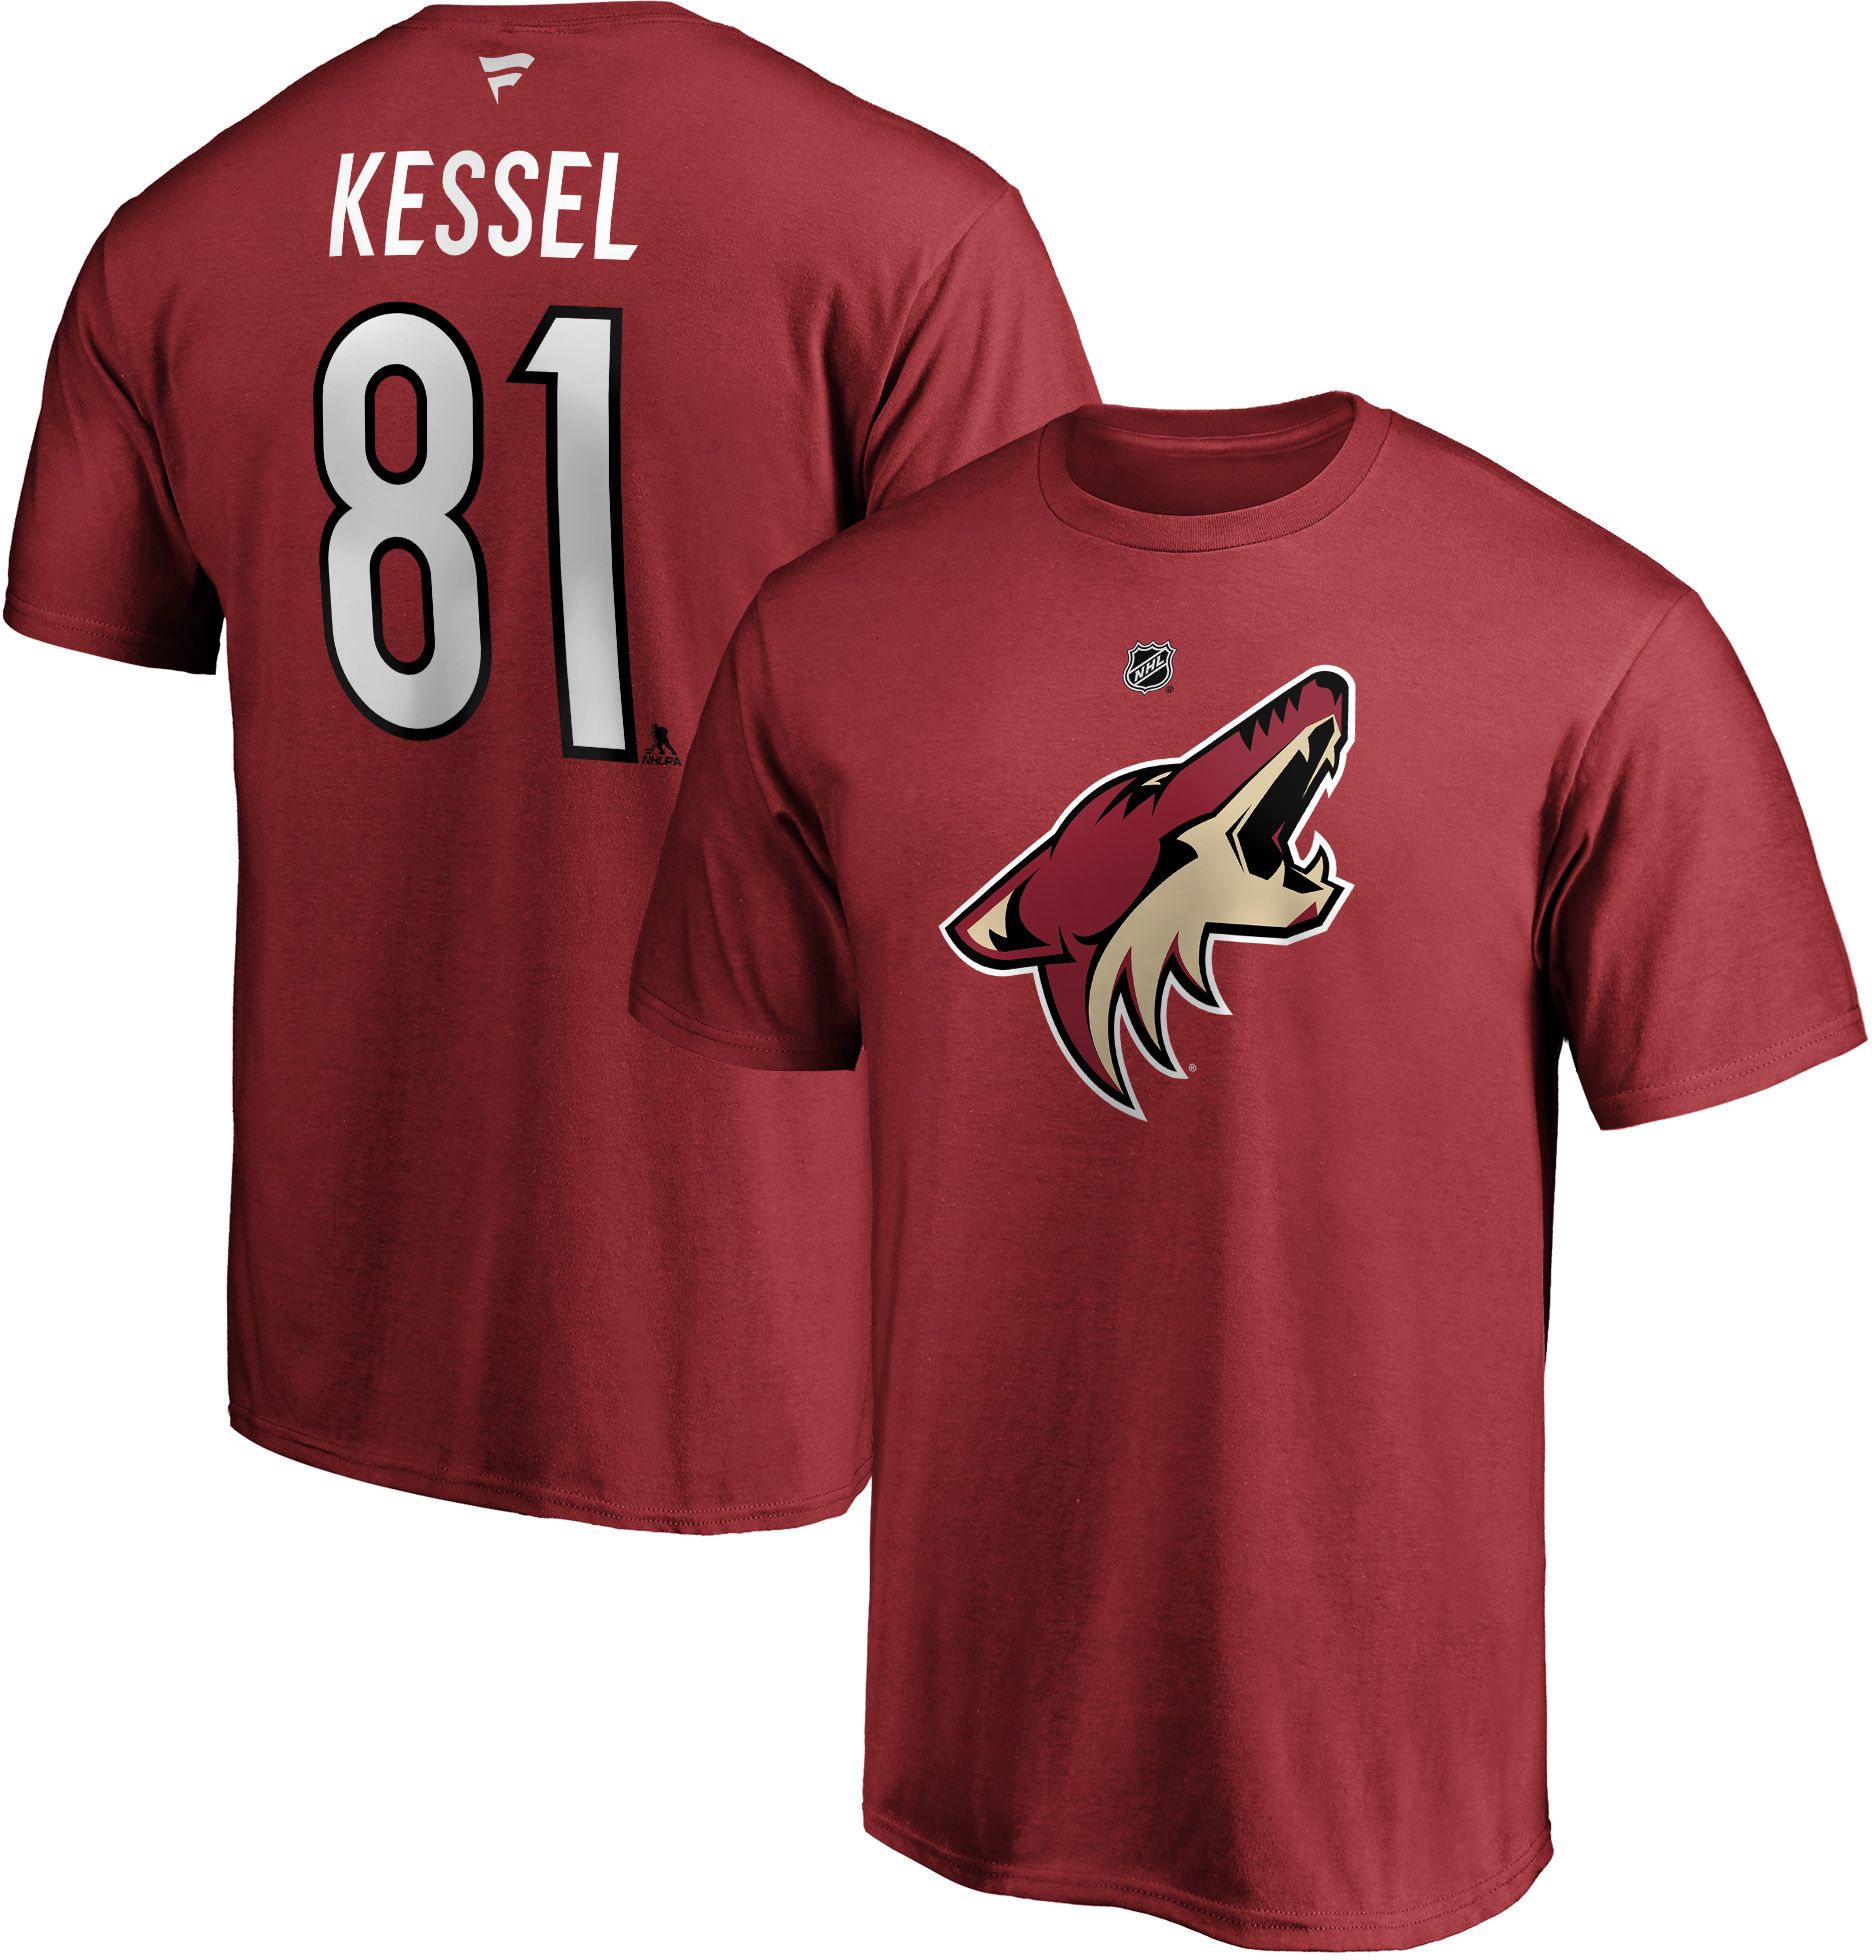 kessel coyotes jersey